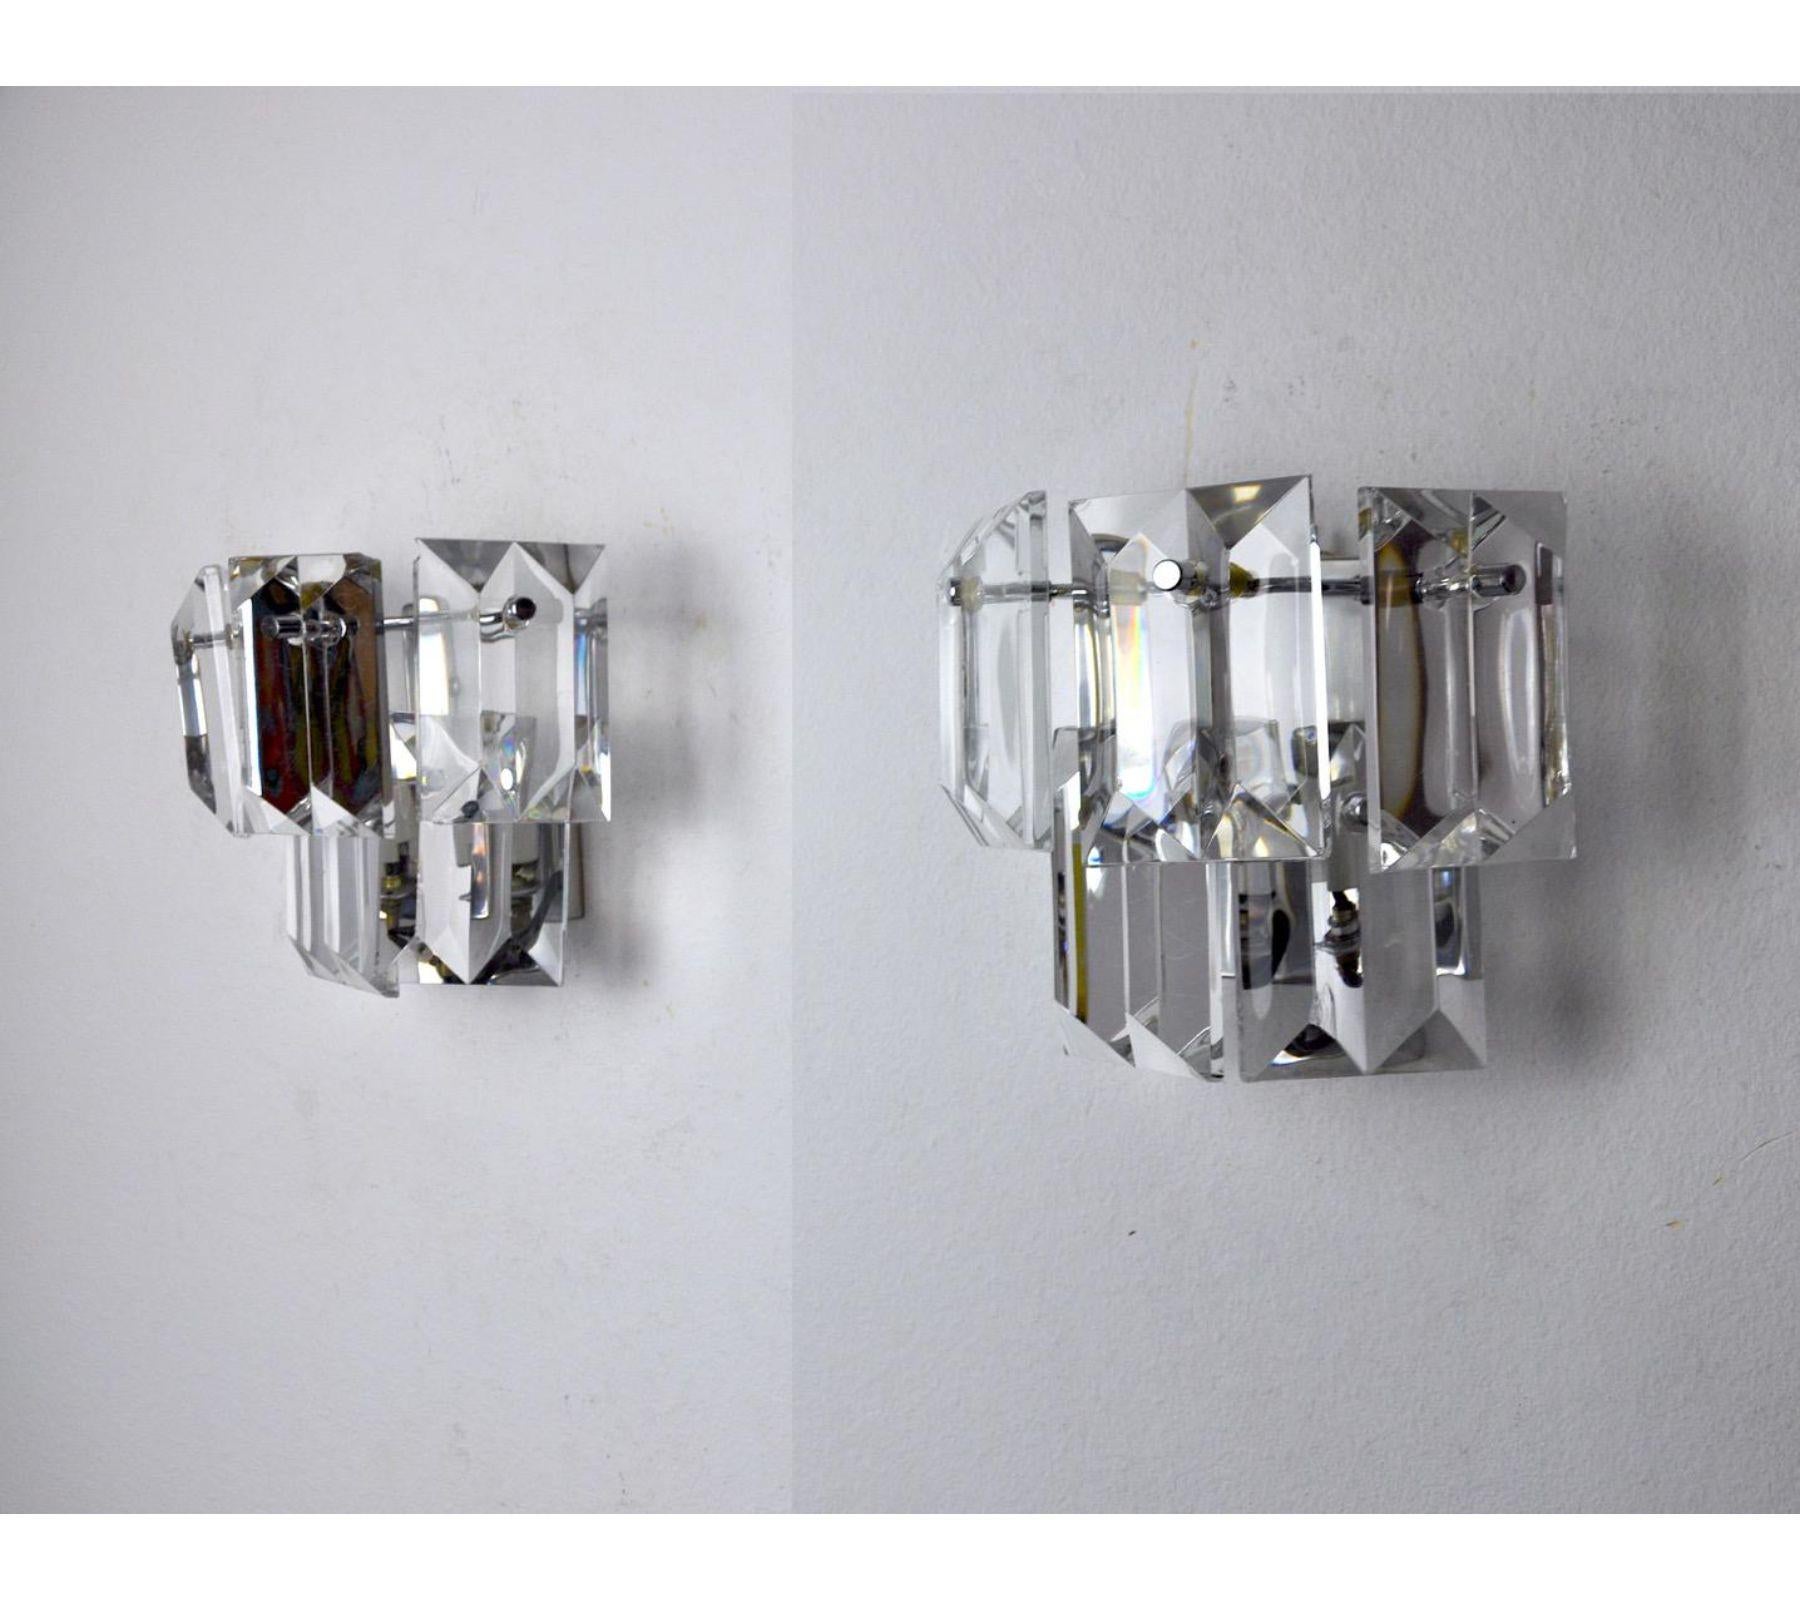 Very nice pair of kinkeldey wall lamps designated and produced in germany in the 1970s. Very beautiful design object that will illuminate your interior wonderfully. Electricity verified, time marks in accordance with the age of the object. 
Sconce: